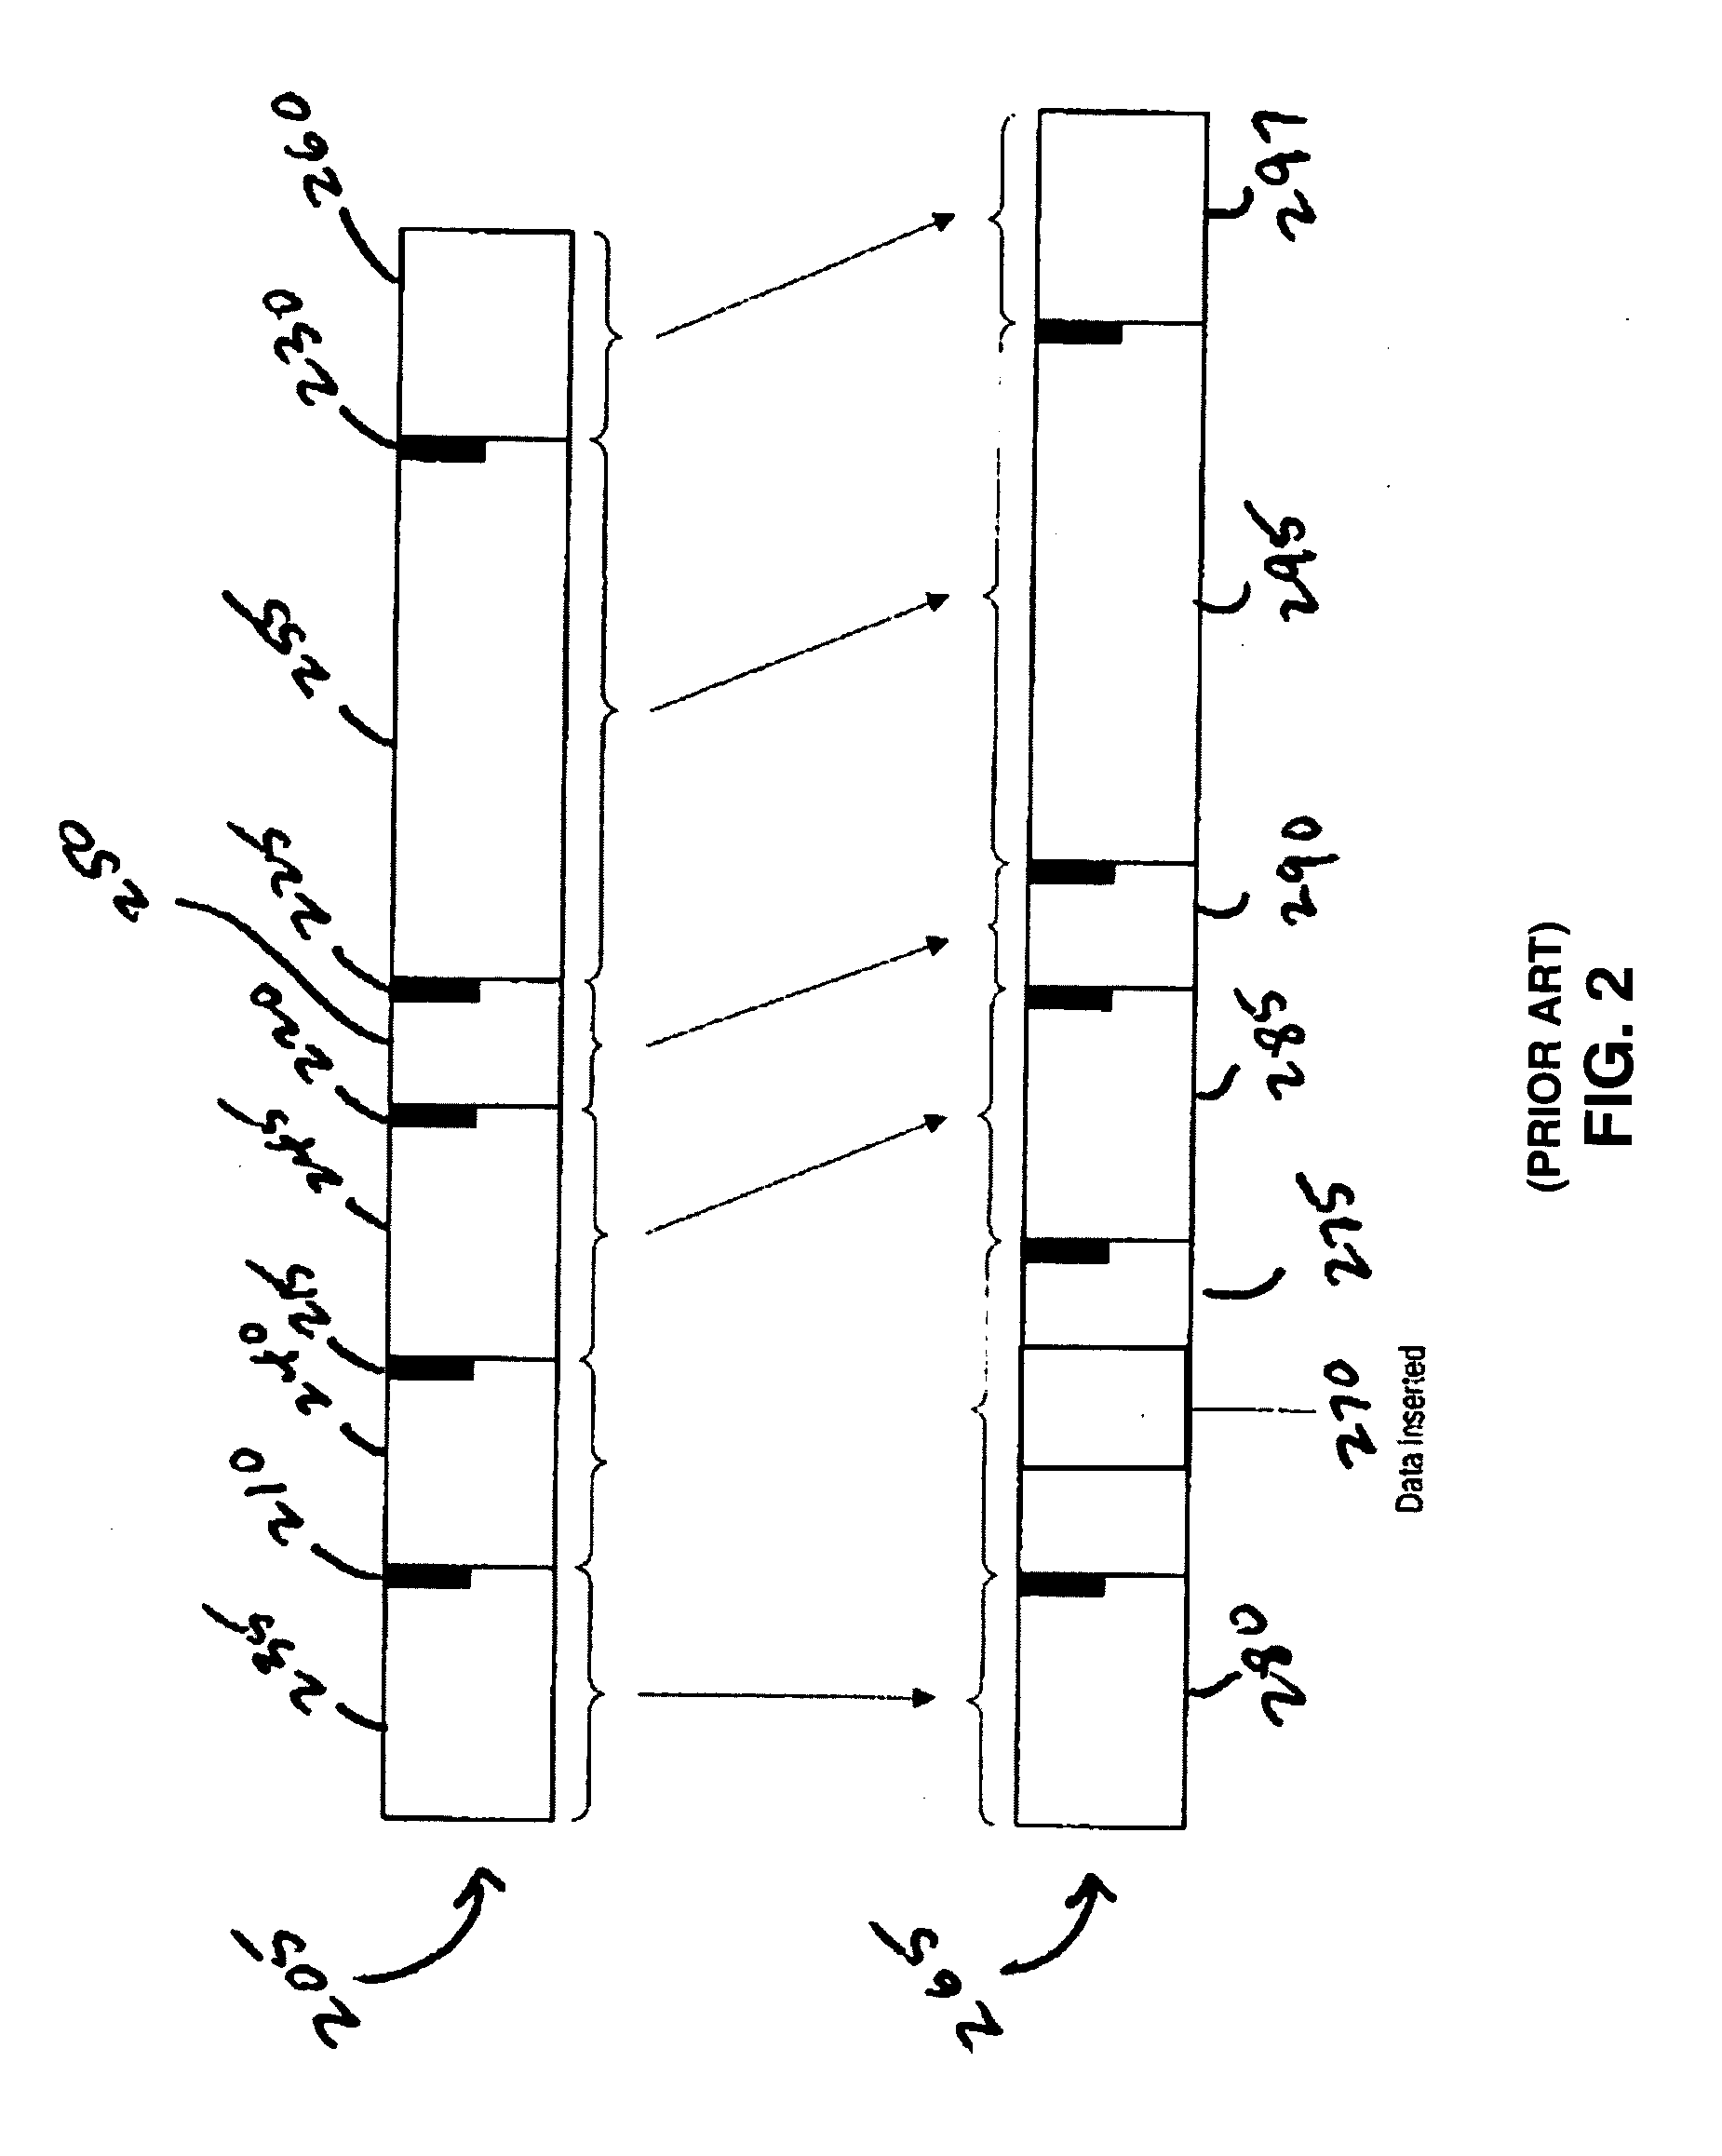 System and method for dividing data into predominantly fixed-sized chunks so that duplicate data chunks may be identified